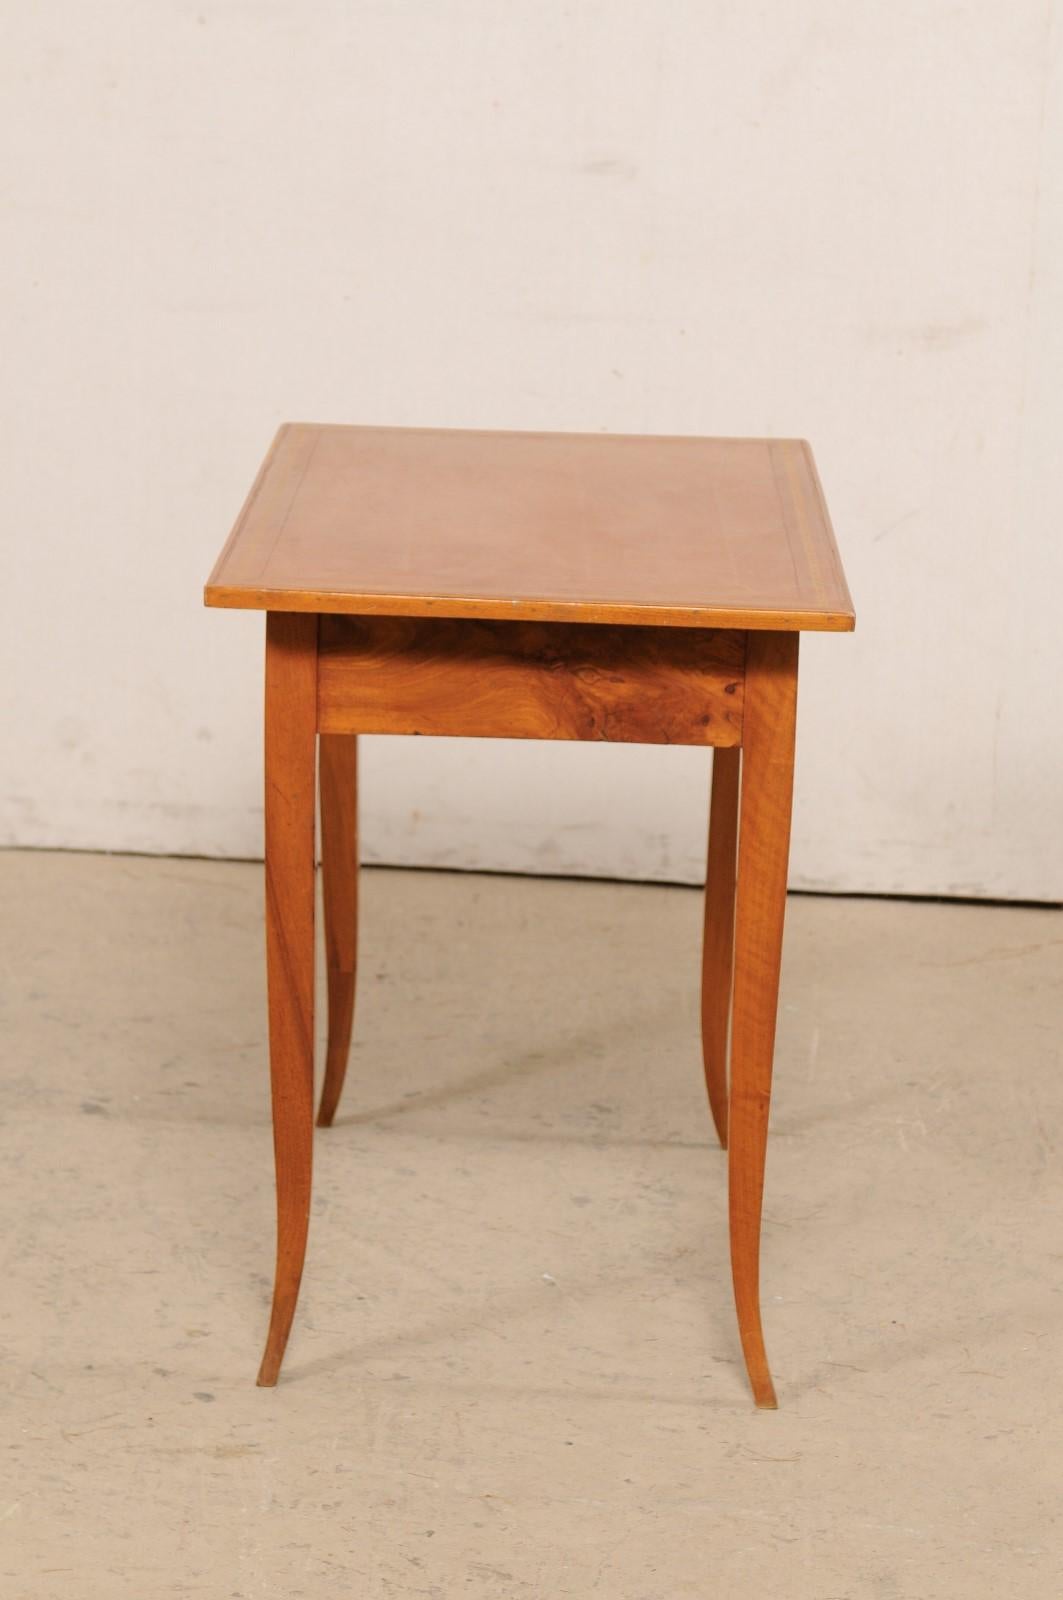 Italian 19th C. Smaller-Sized Desk with Leather Writing Pad Top & Single Drawer 4